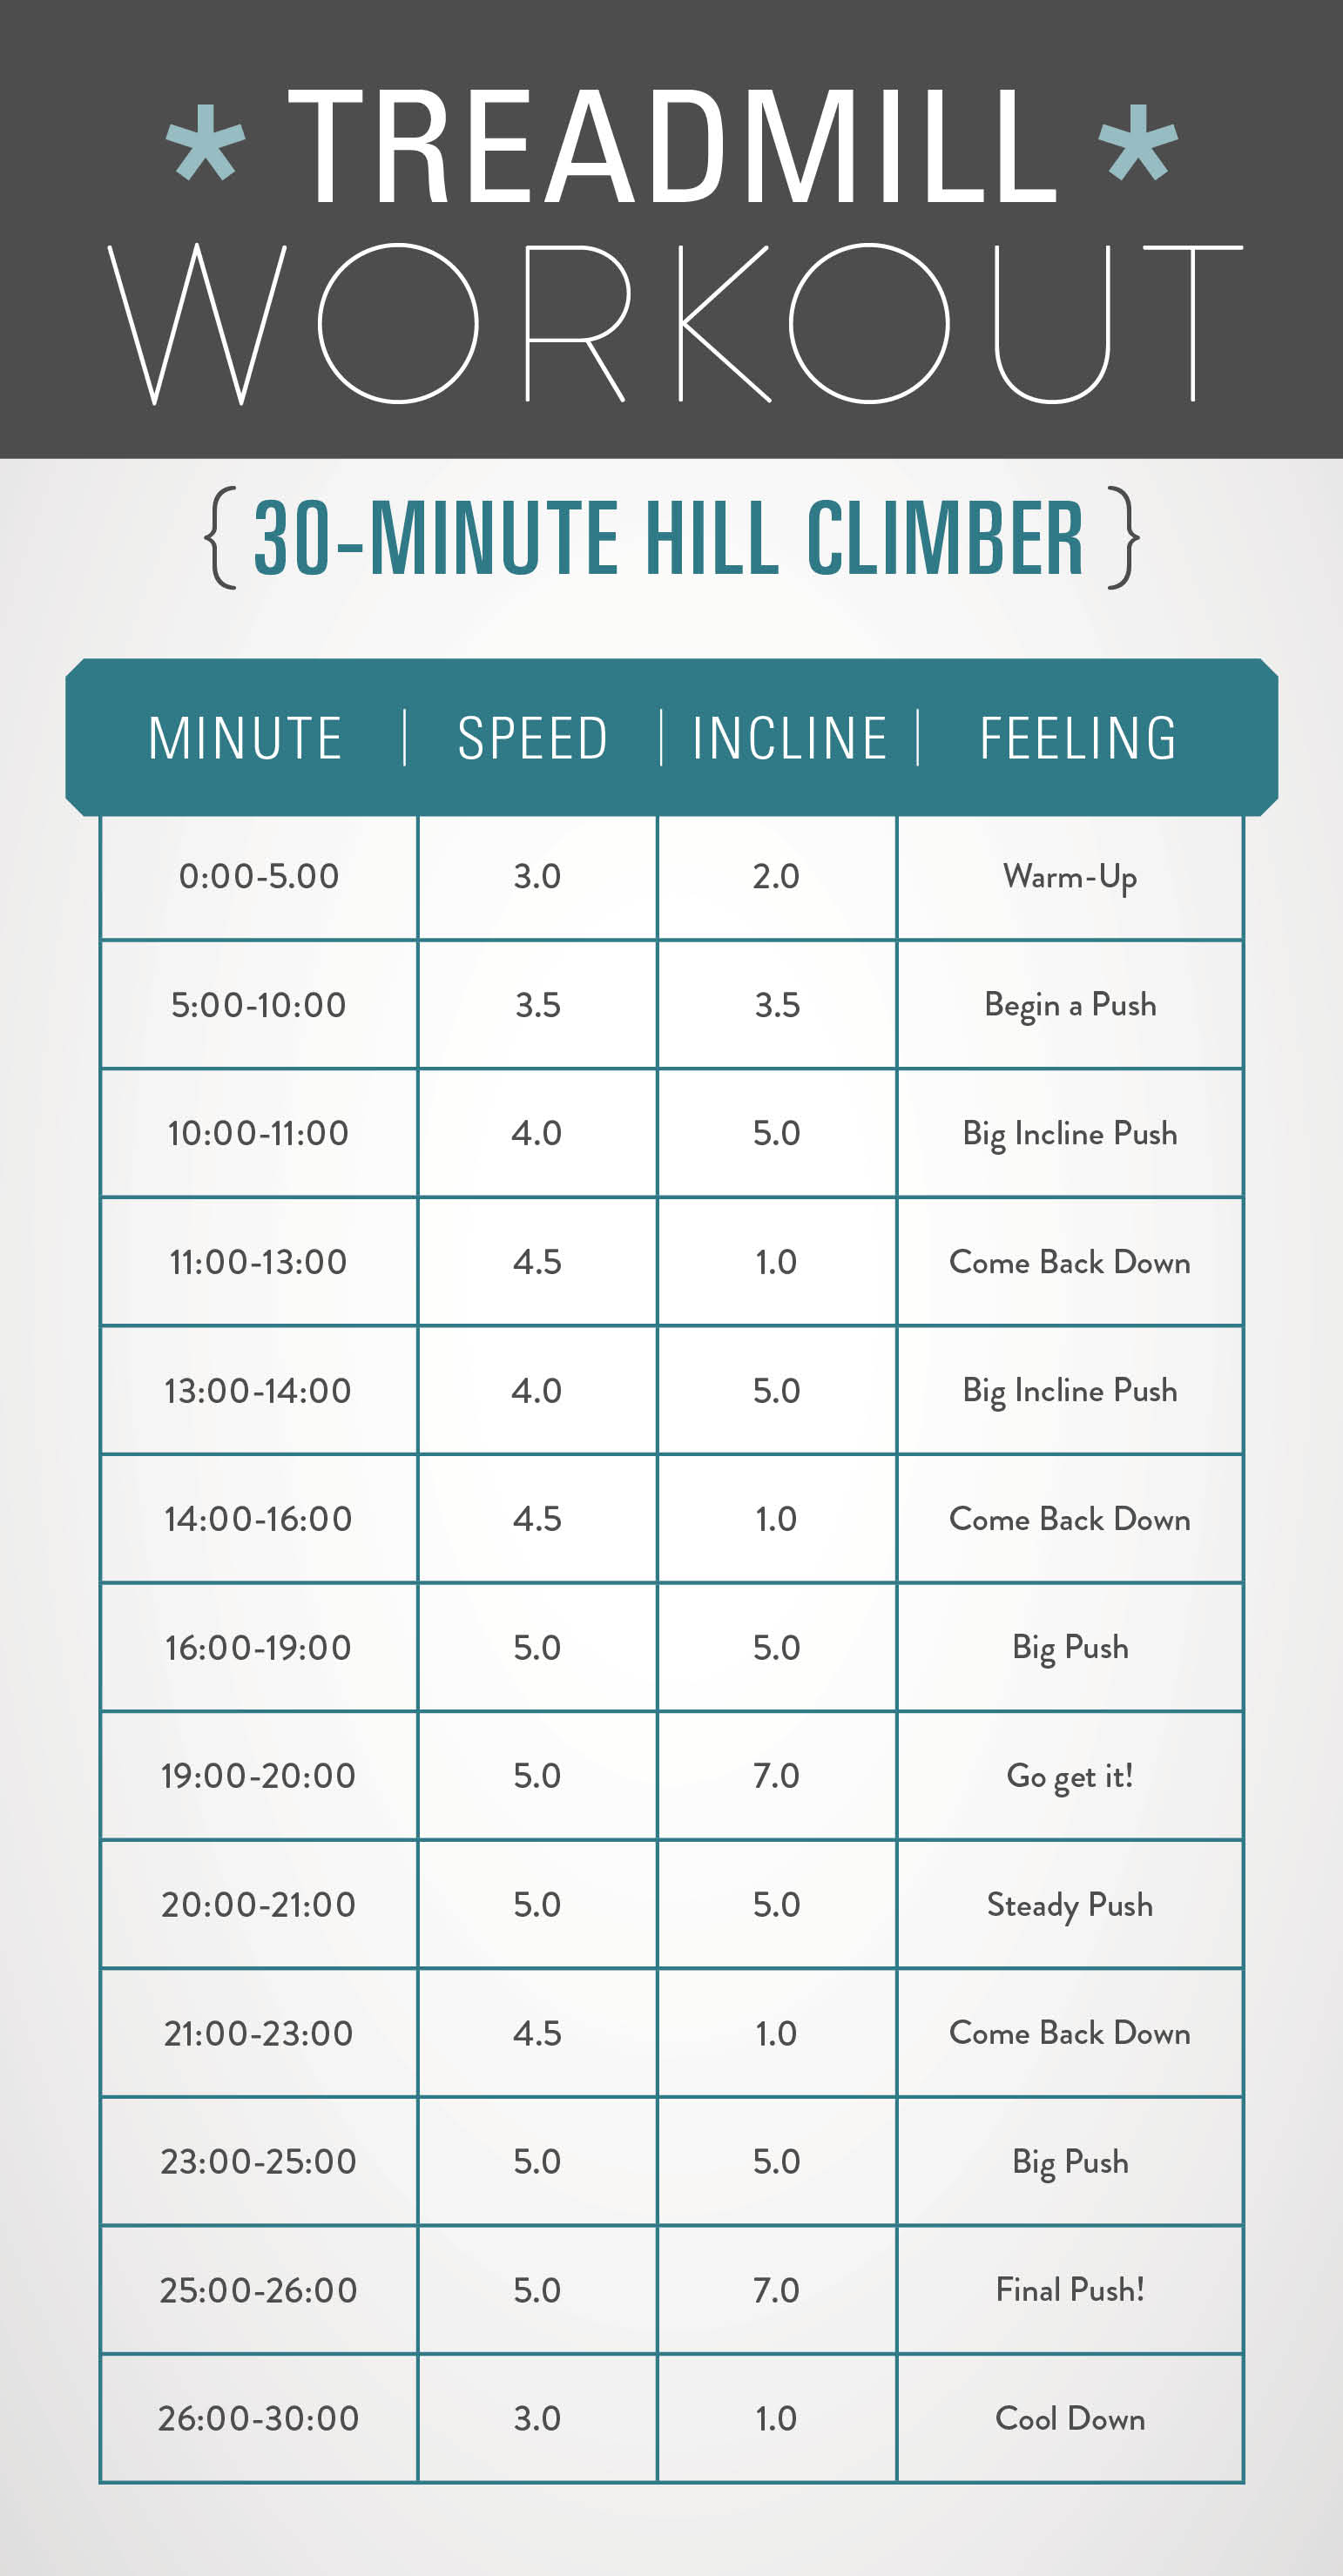 III. Different Types of Treadmill Workouts